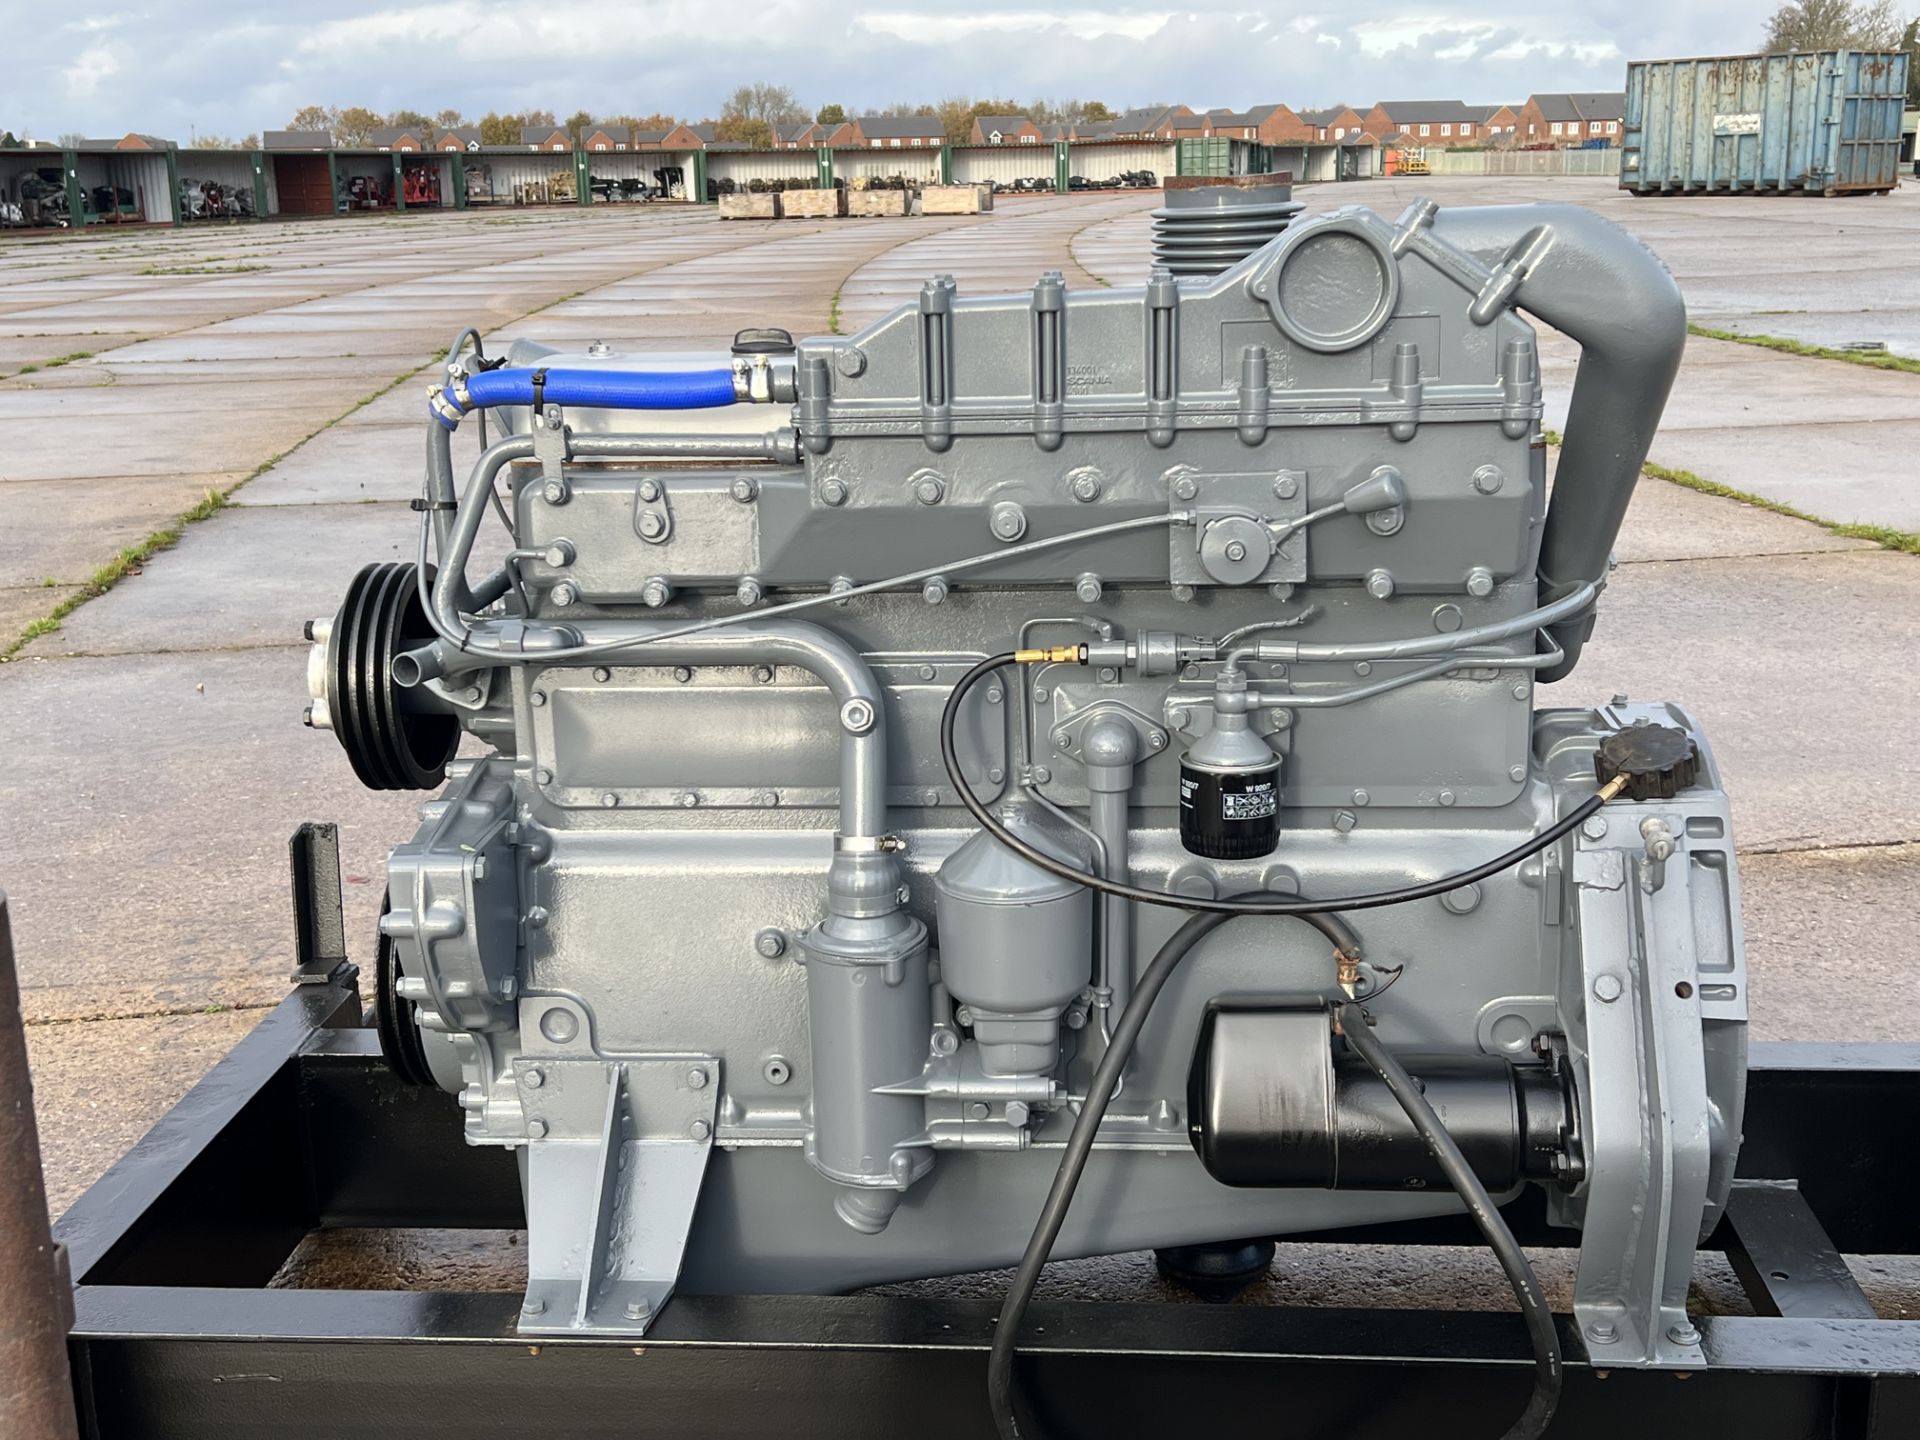 Scania Ds11 62Diesel Engine: Test hours - Image 2 of 4